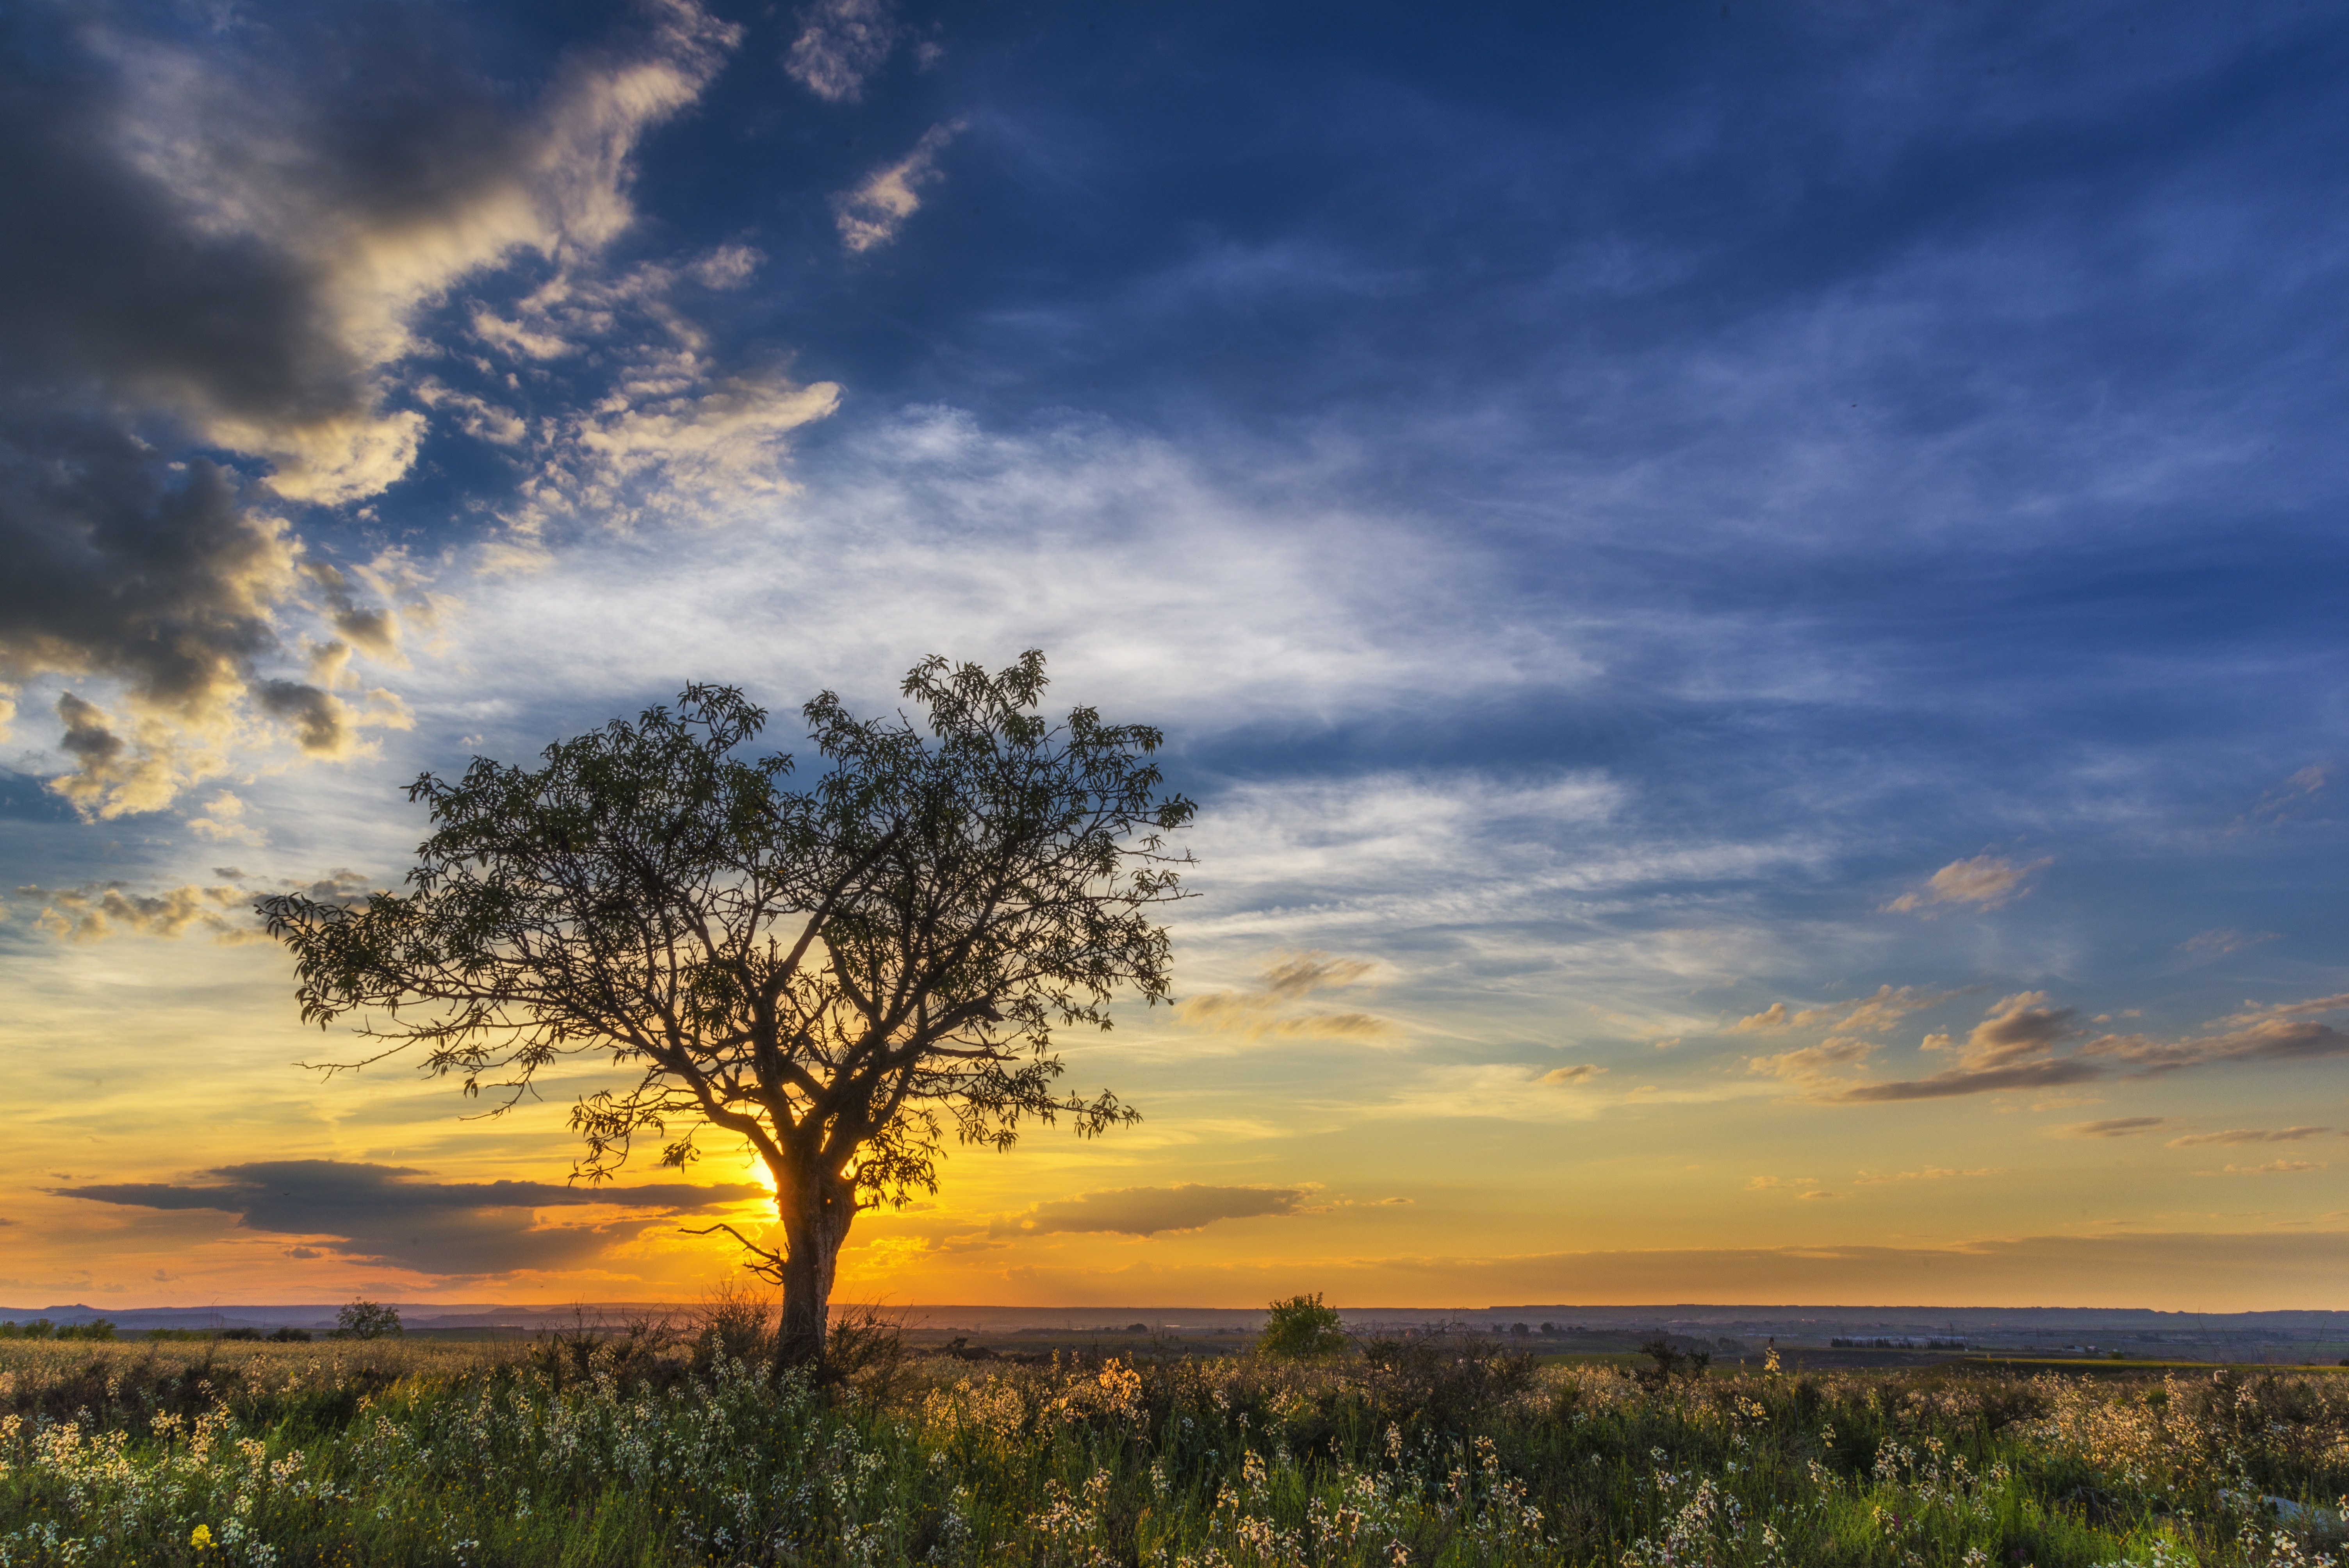 A lone tree in a field at sunset